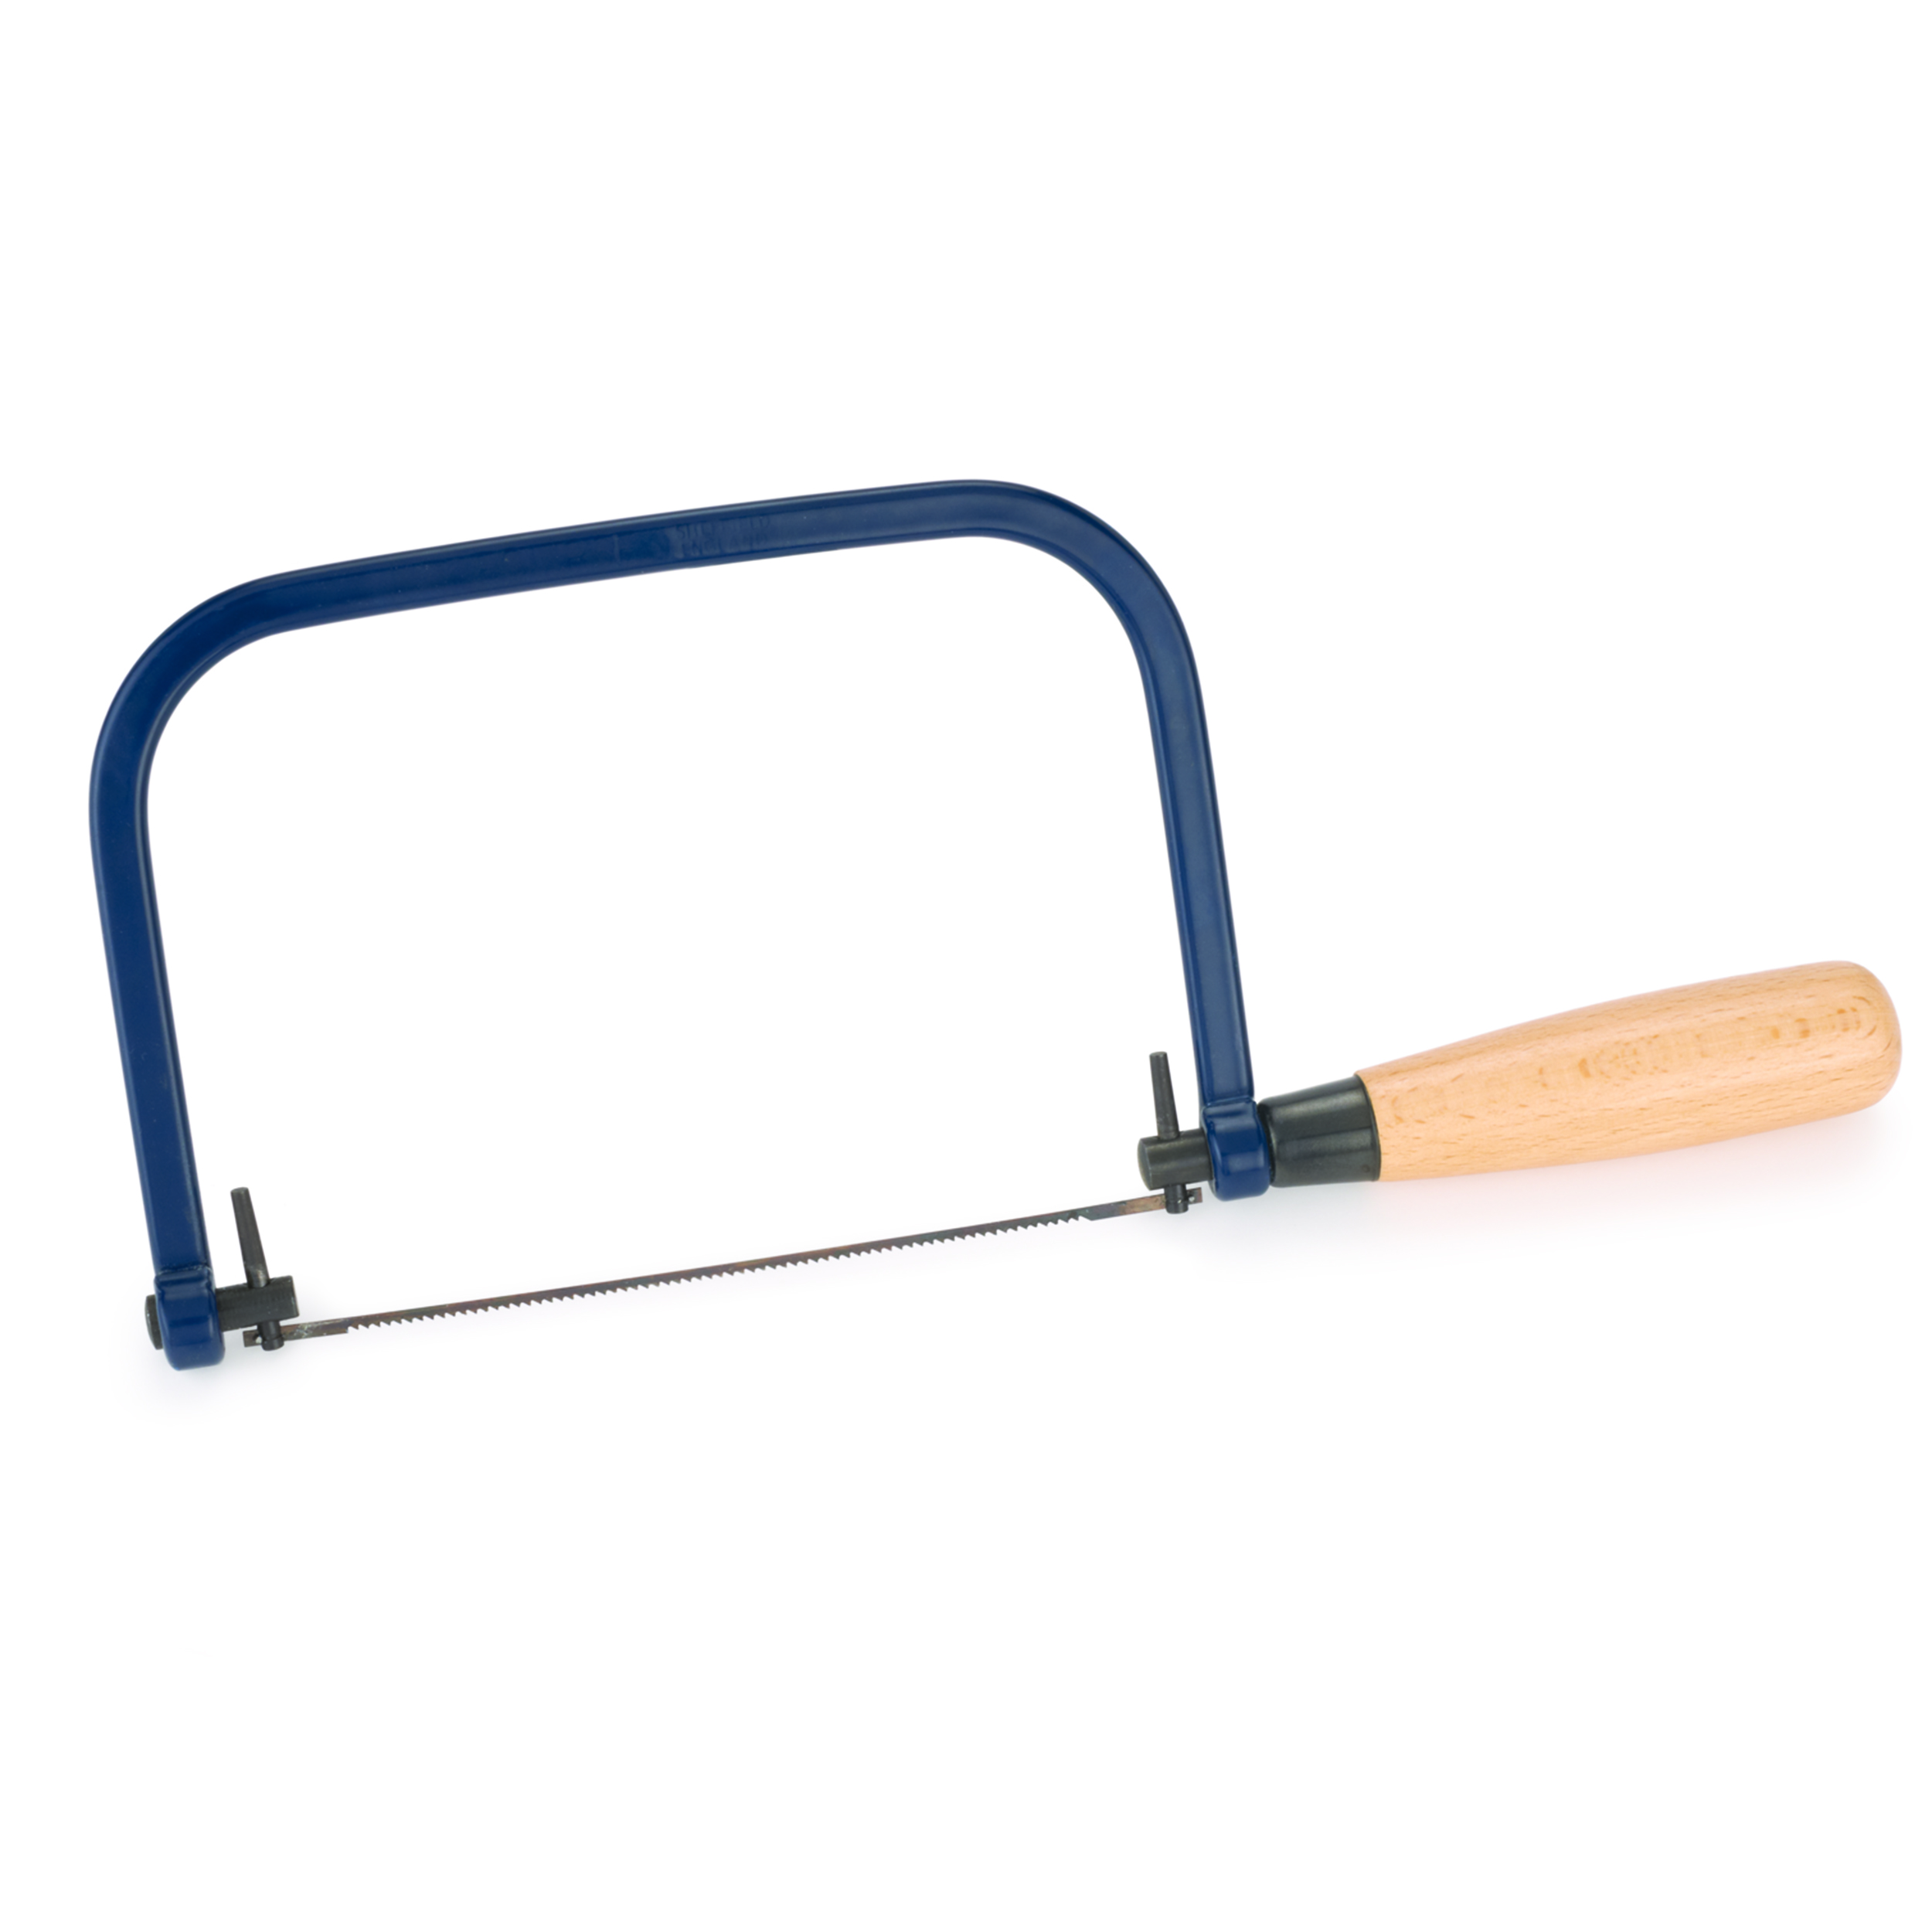 Coping Saw; Model 70-CP1R